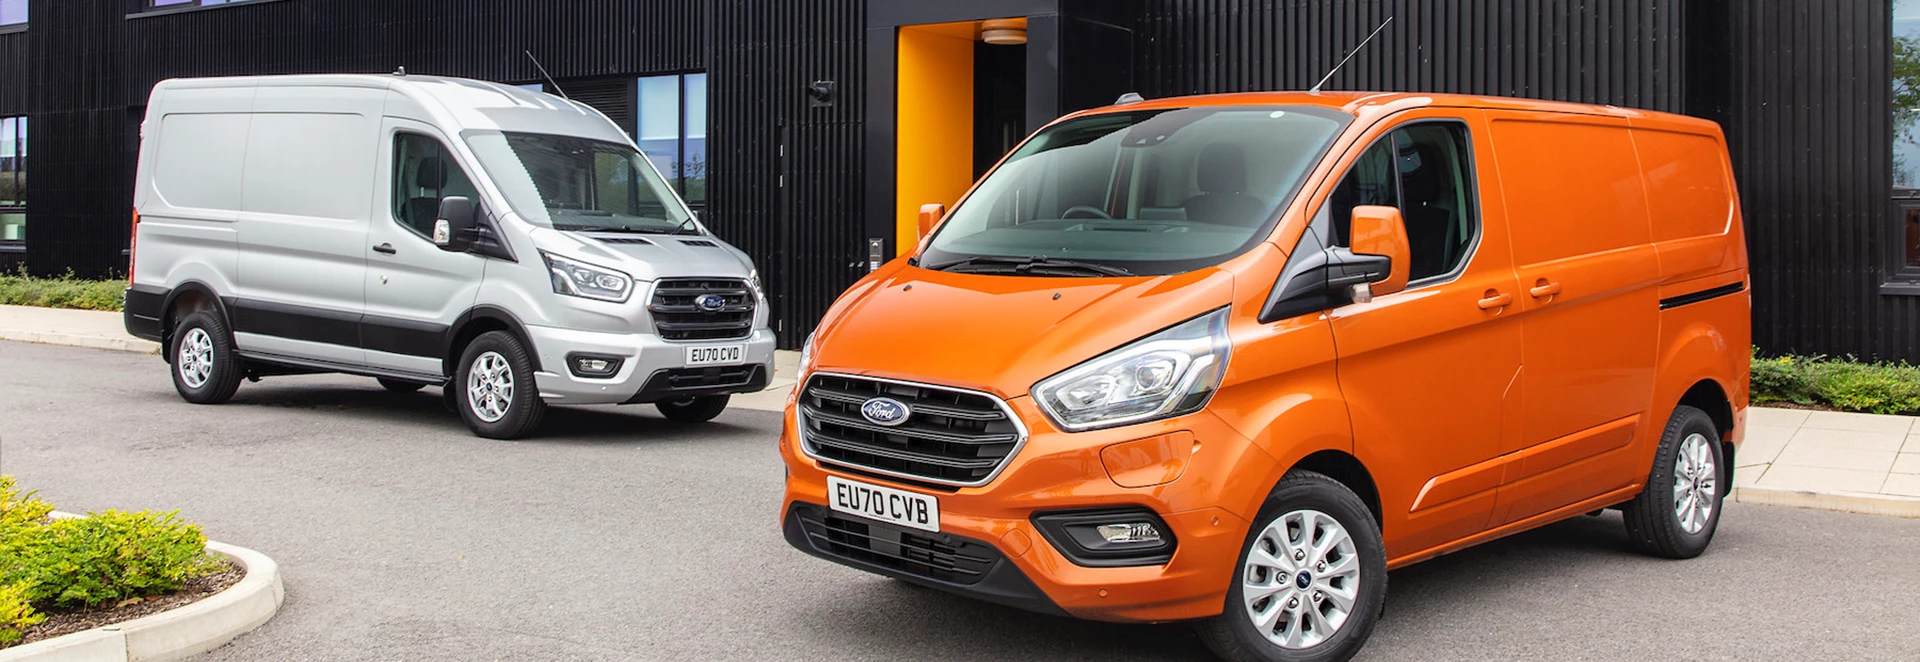 Ford introduces new ‘Guard Mode’ that notifies van owners of security breaches 